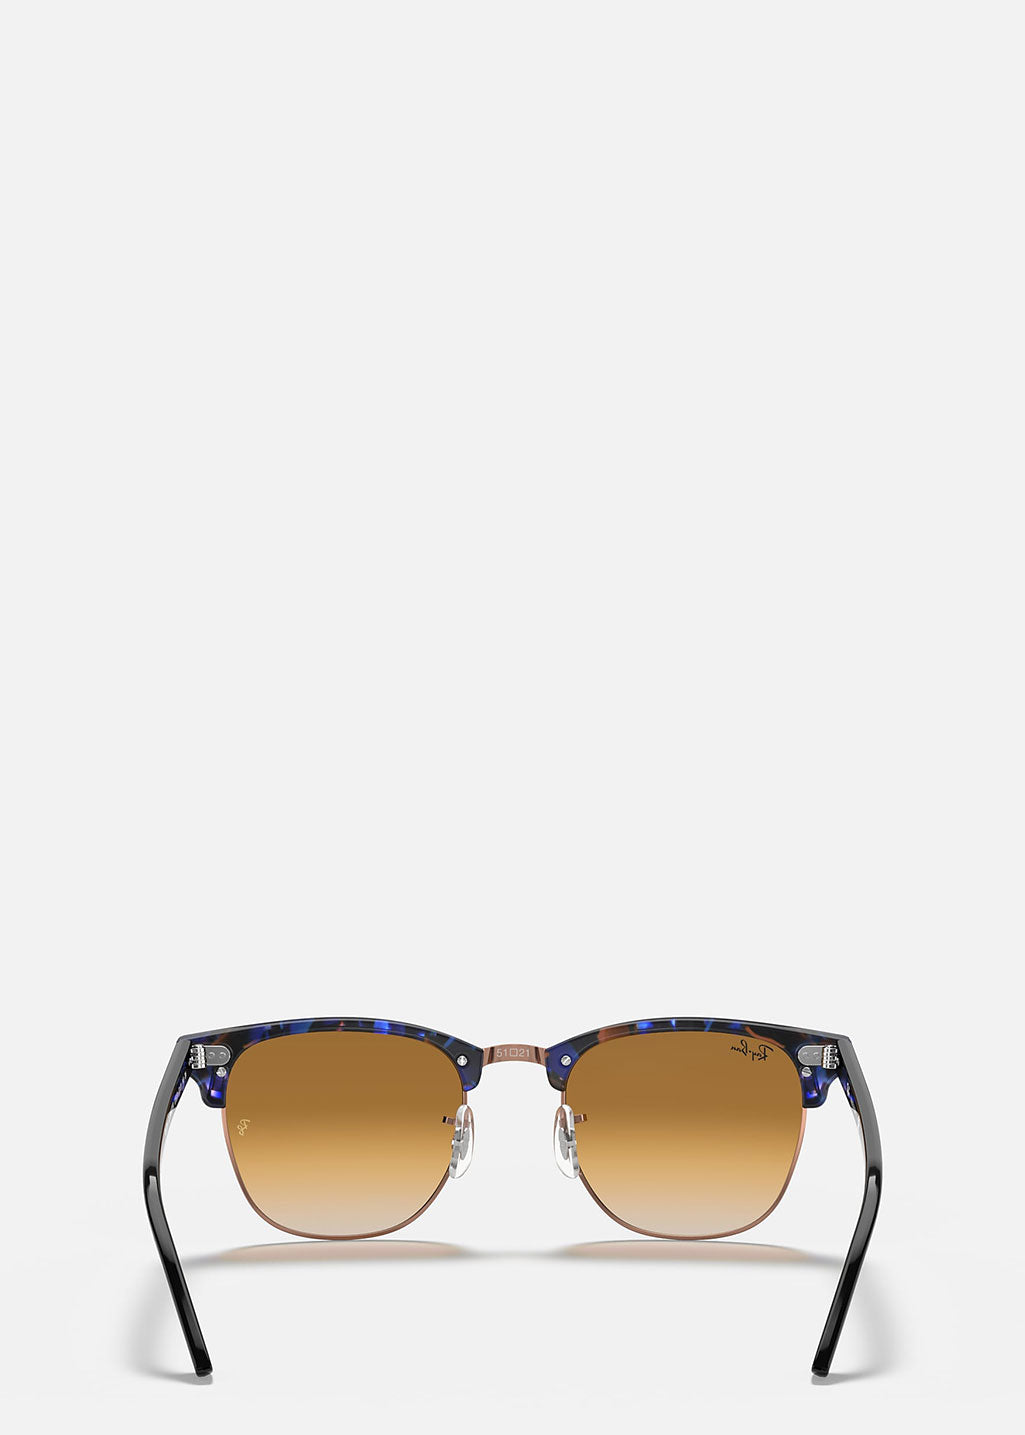 Ray Ban - RB3016 - 12565151 - Clubmaster Spotted Brown/Blue W/ Clear Gradient BR - Hardpressed Print Studio Inc.